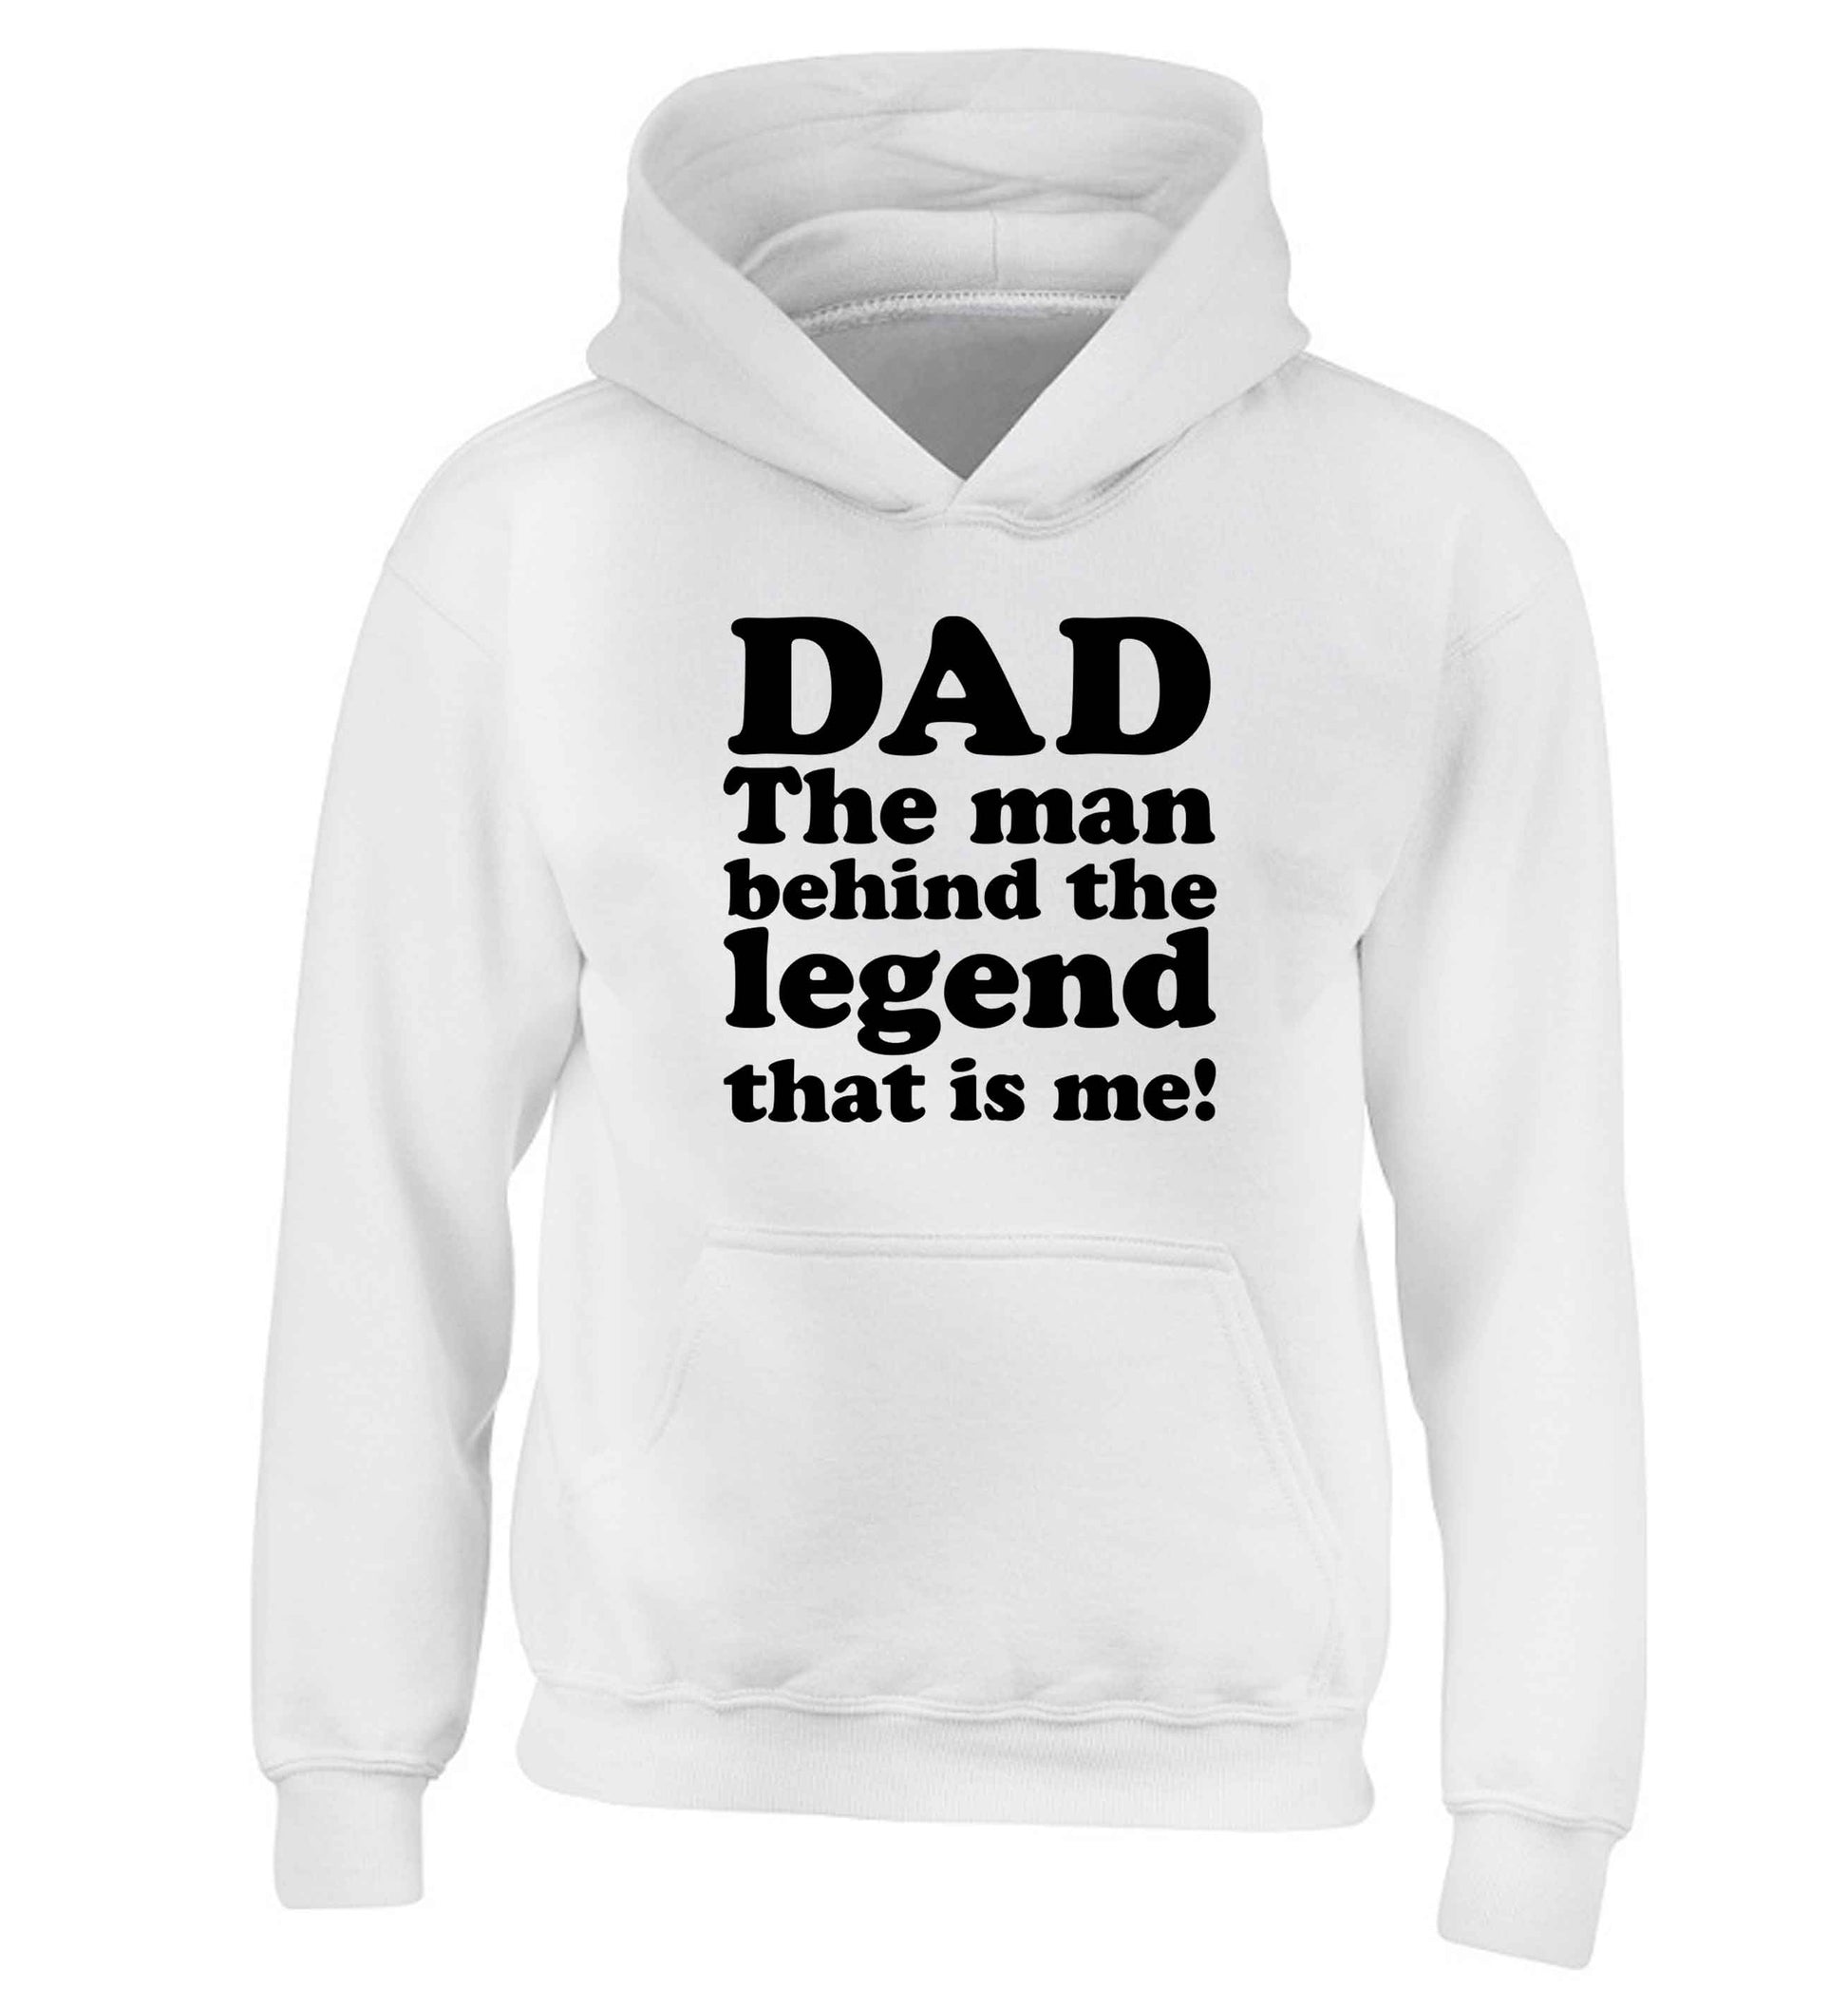 Dad the man behind the legend that is me children's white hoodie 12-13 Years